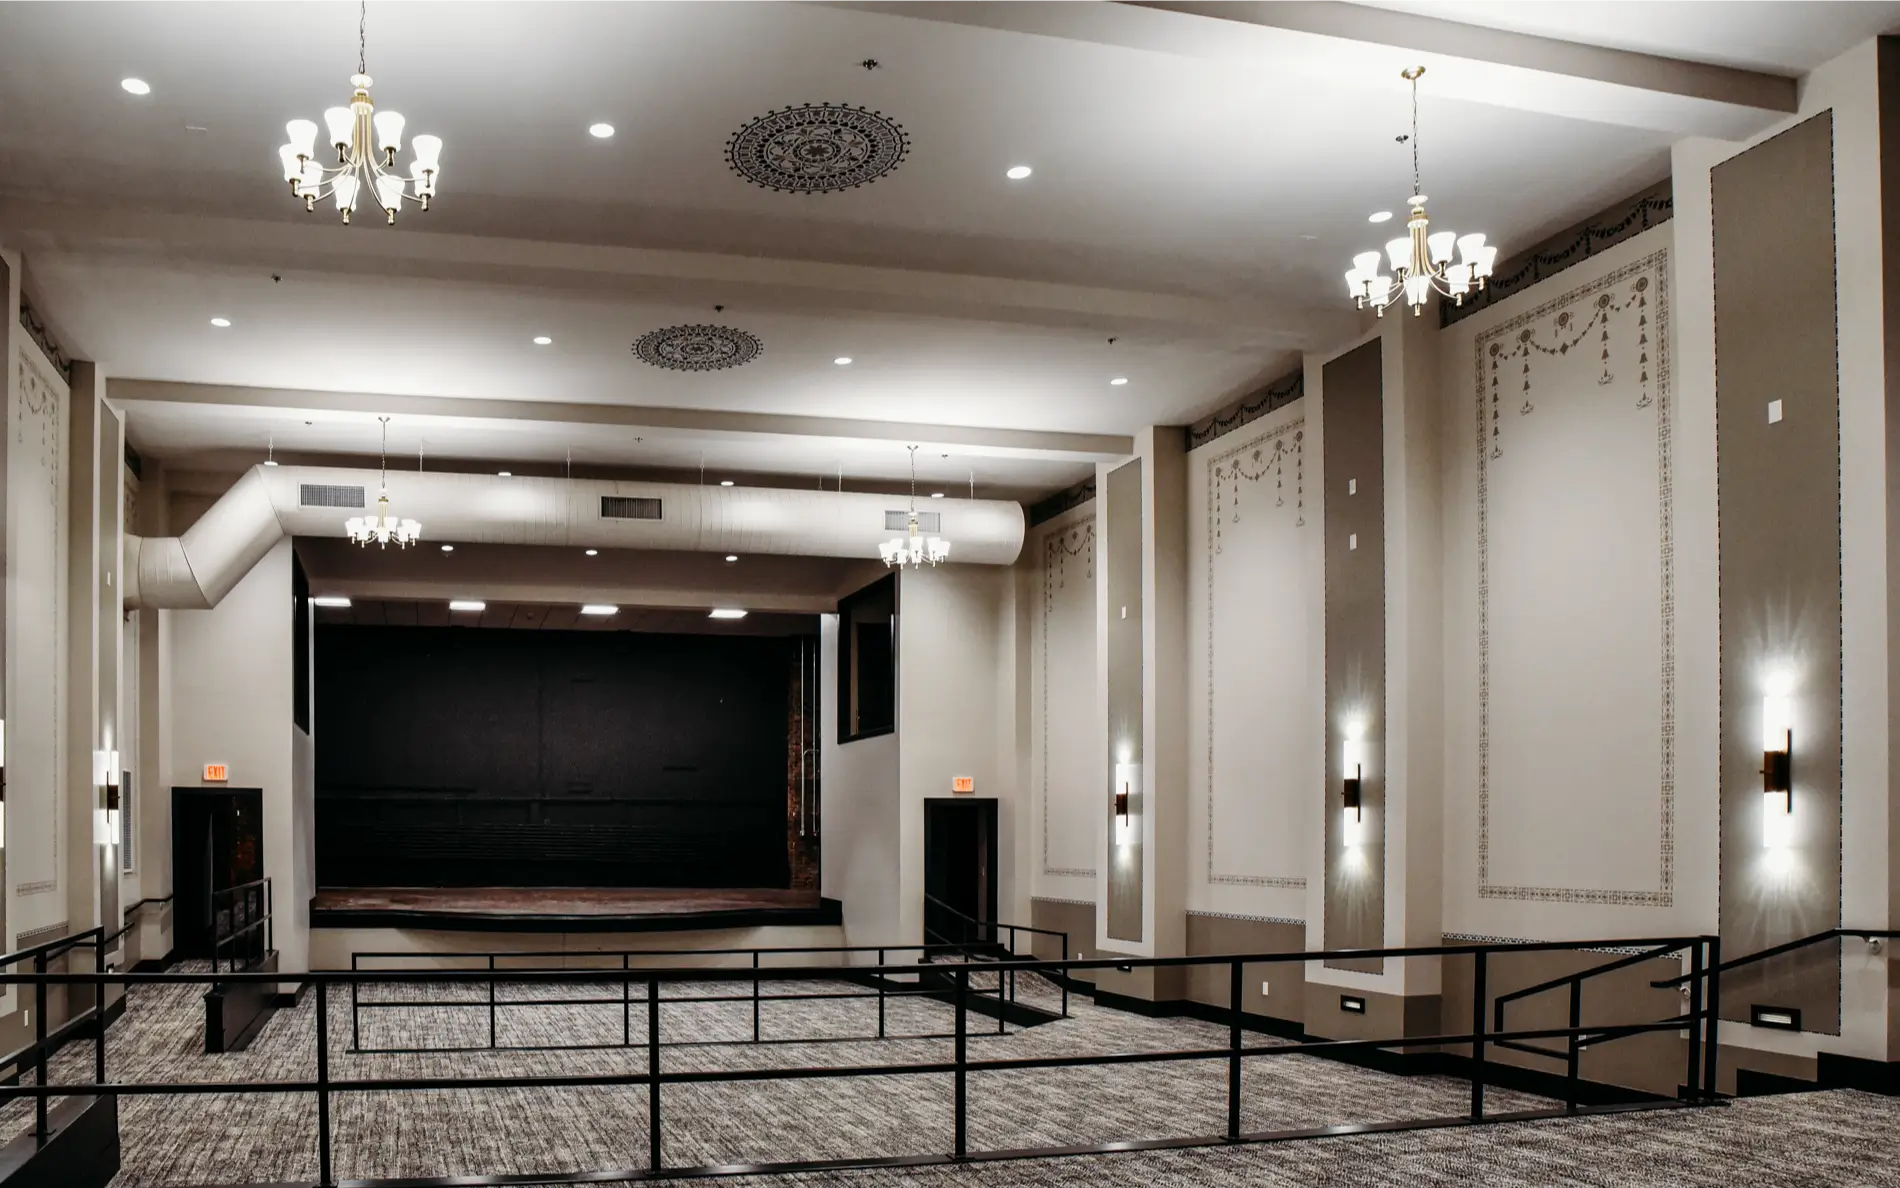 the dawn theater main event space with stenciling detail on the ceiling and walls